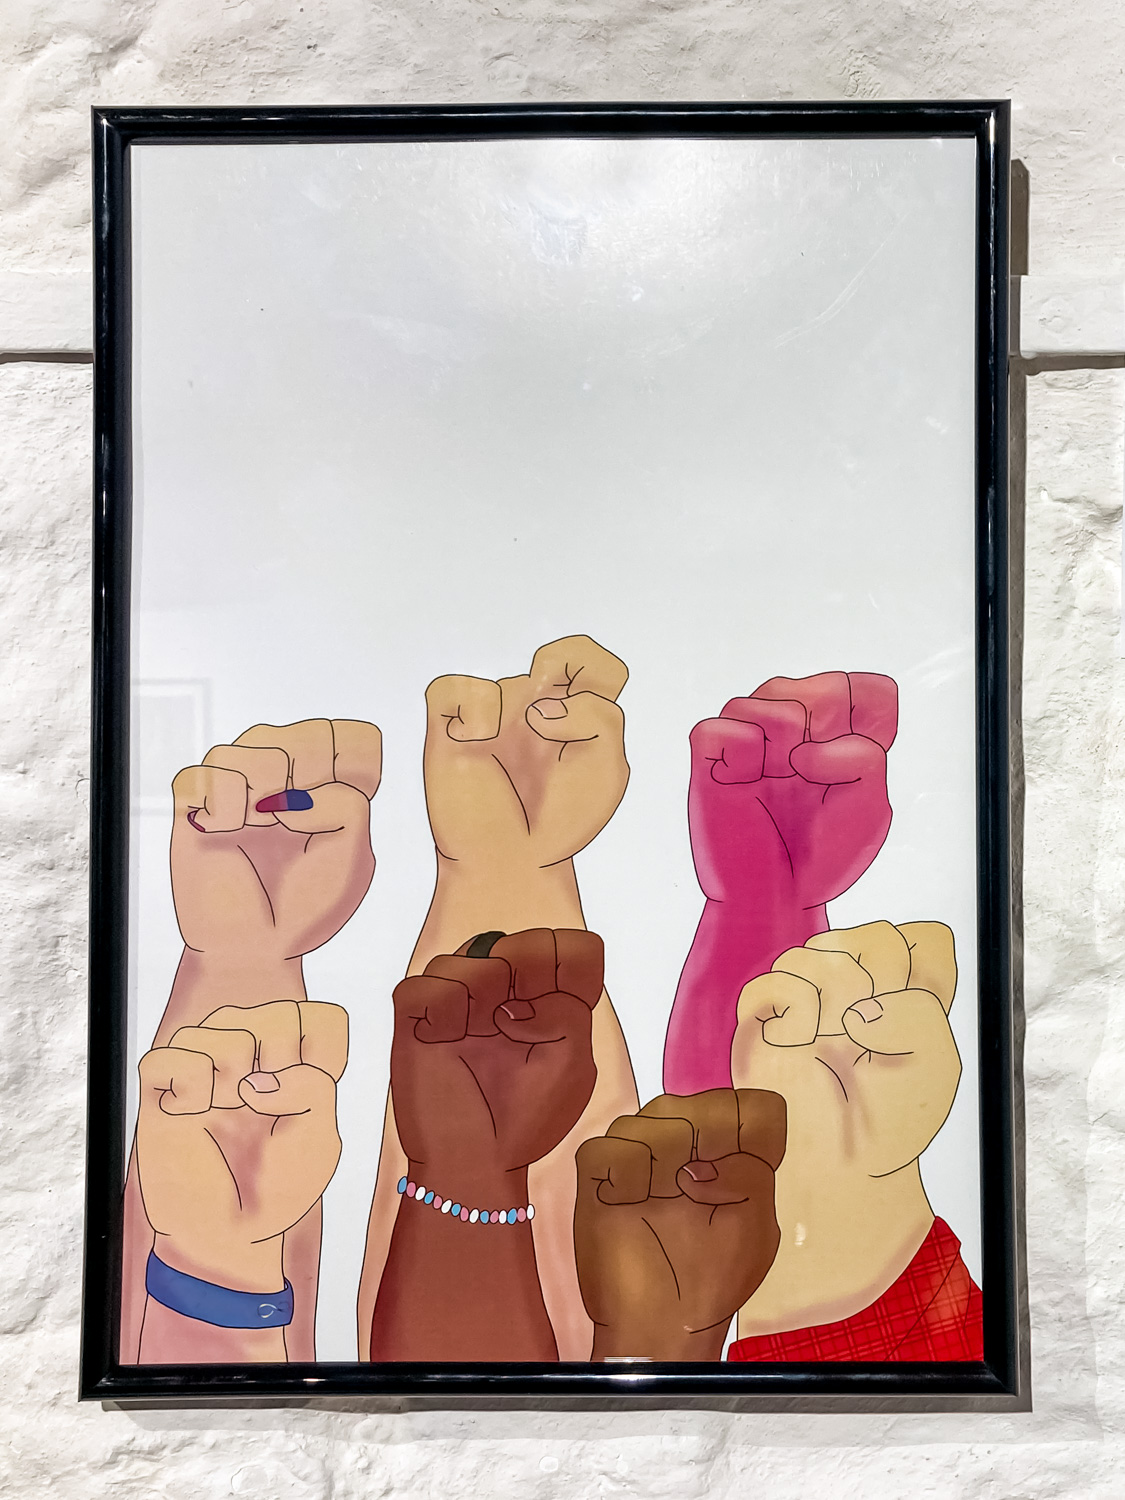 An art work of seven raised fists of various skin colours